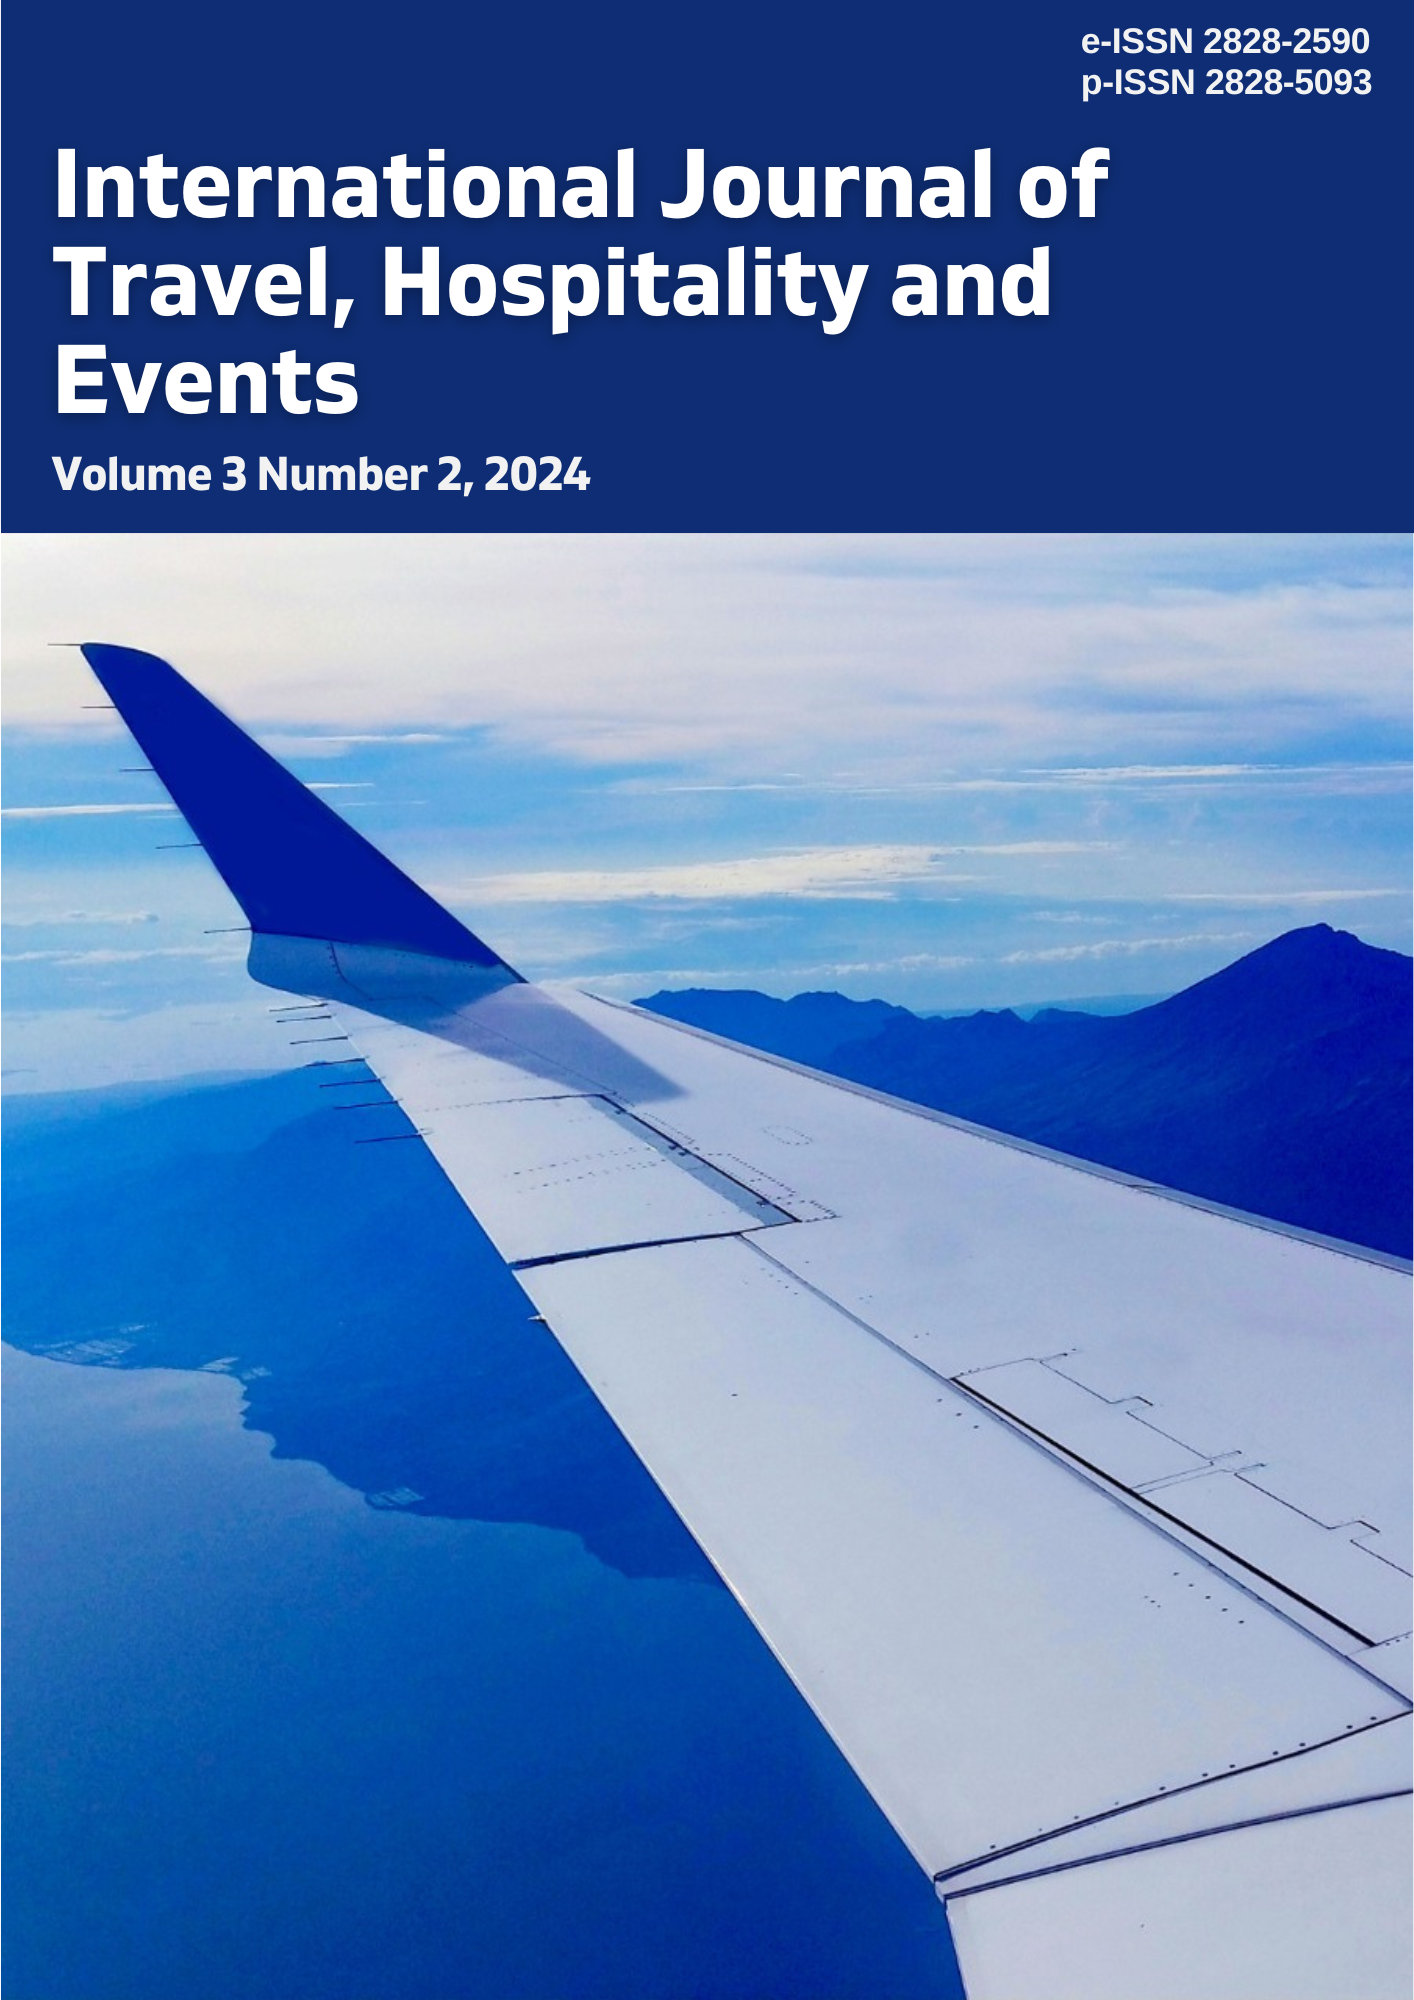 					View Vol. 3 No. 2 (2024): International Journal of Travel, Hospitality and Events
				